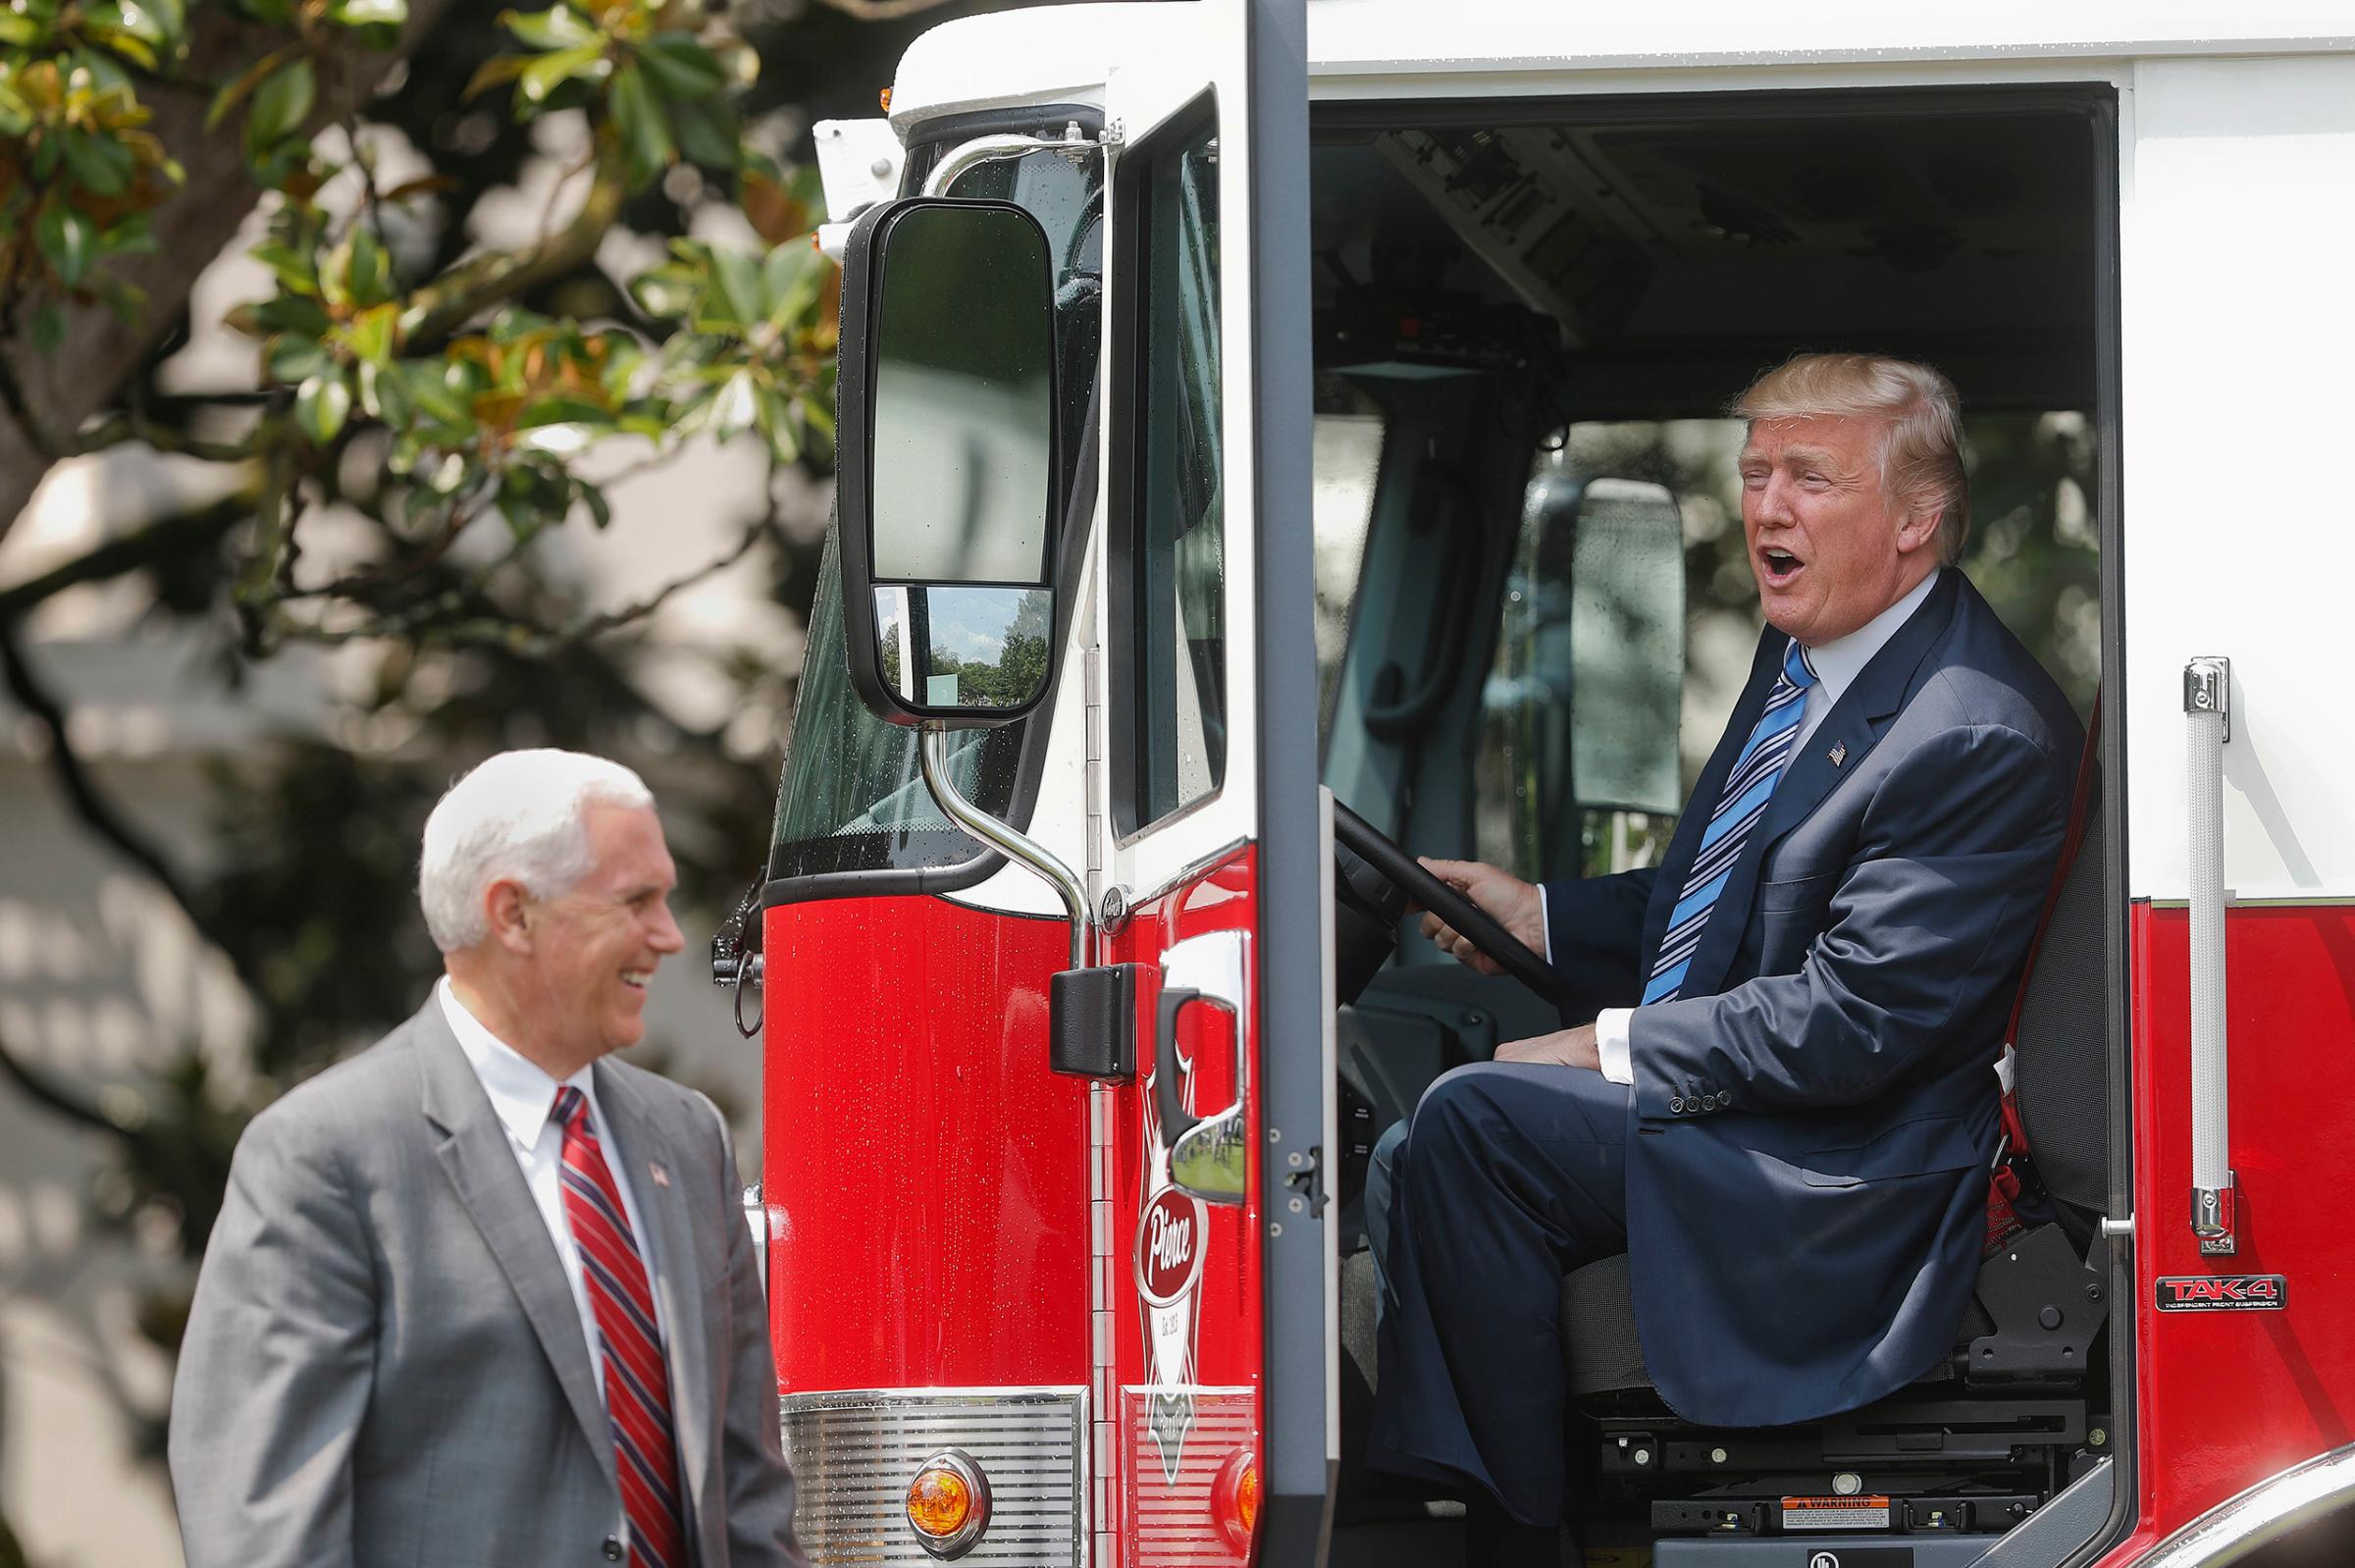 President Donald Trump, accompanied by Vice President Mike Pence, sits inside a cabin of a firetruck during a "Made in America," product showcase featuring items created in each of the U.S. 50 states, Monday, July 17, 2017, on the South Lawn of the White House in Washington.